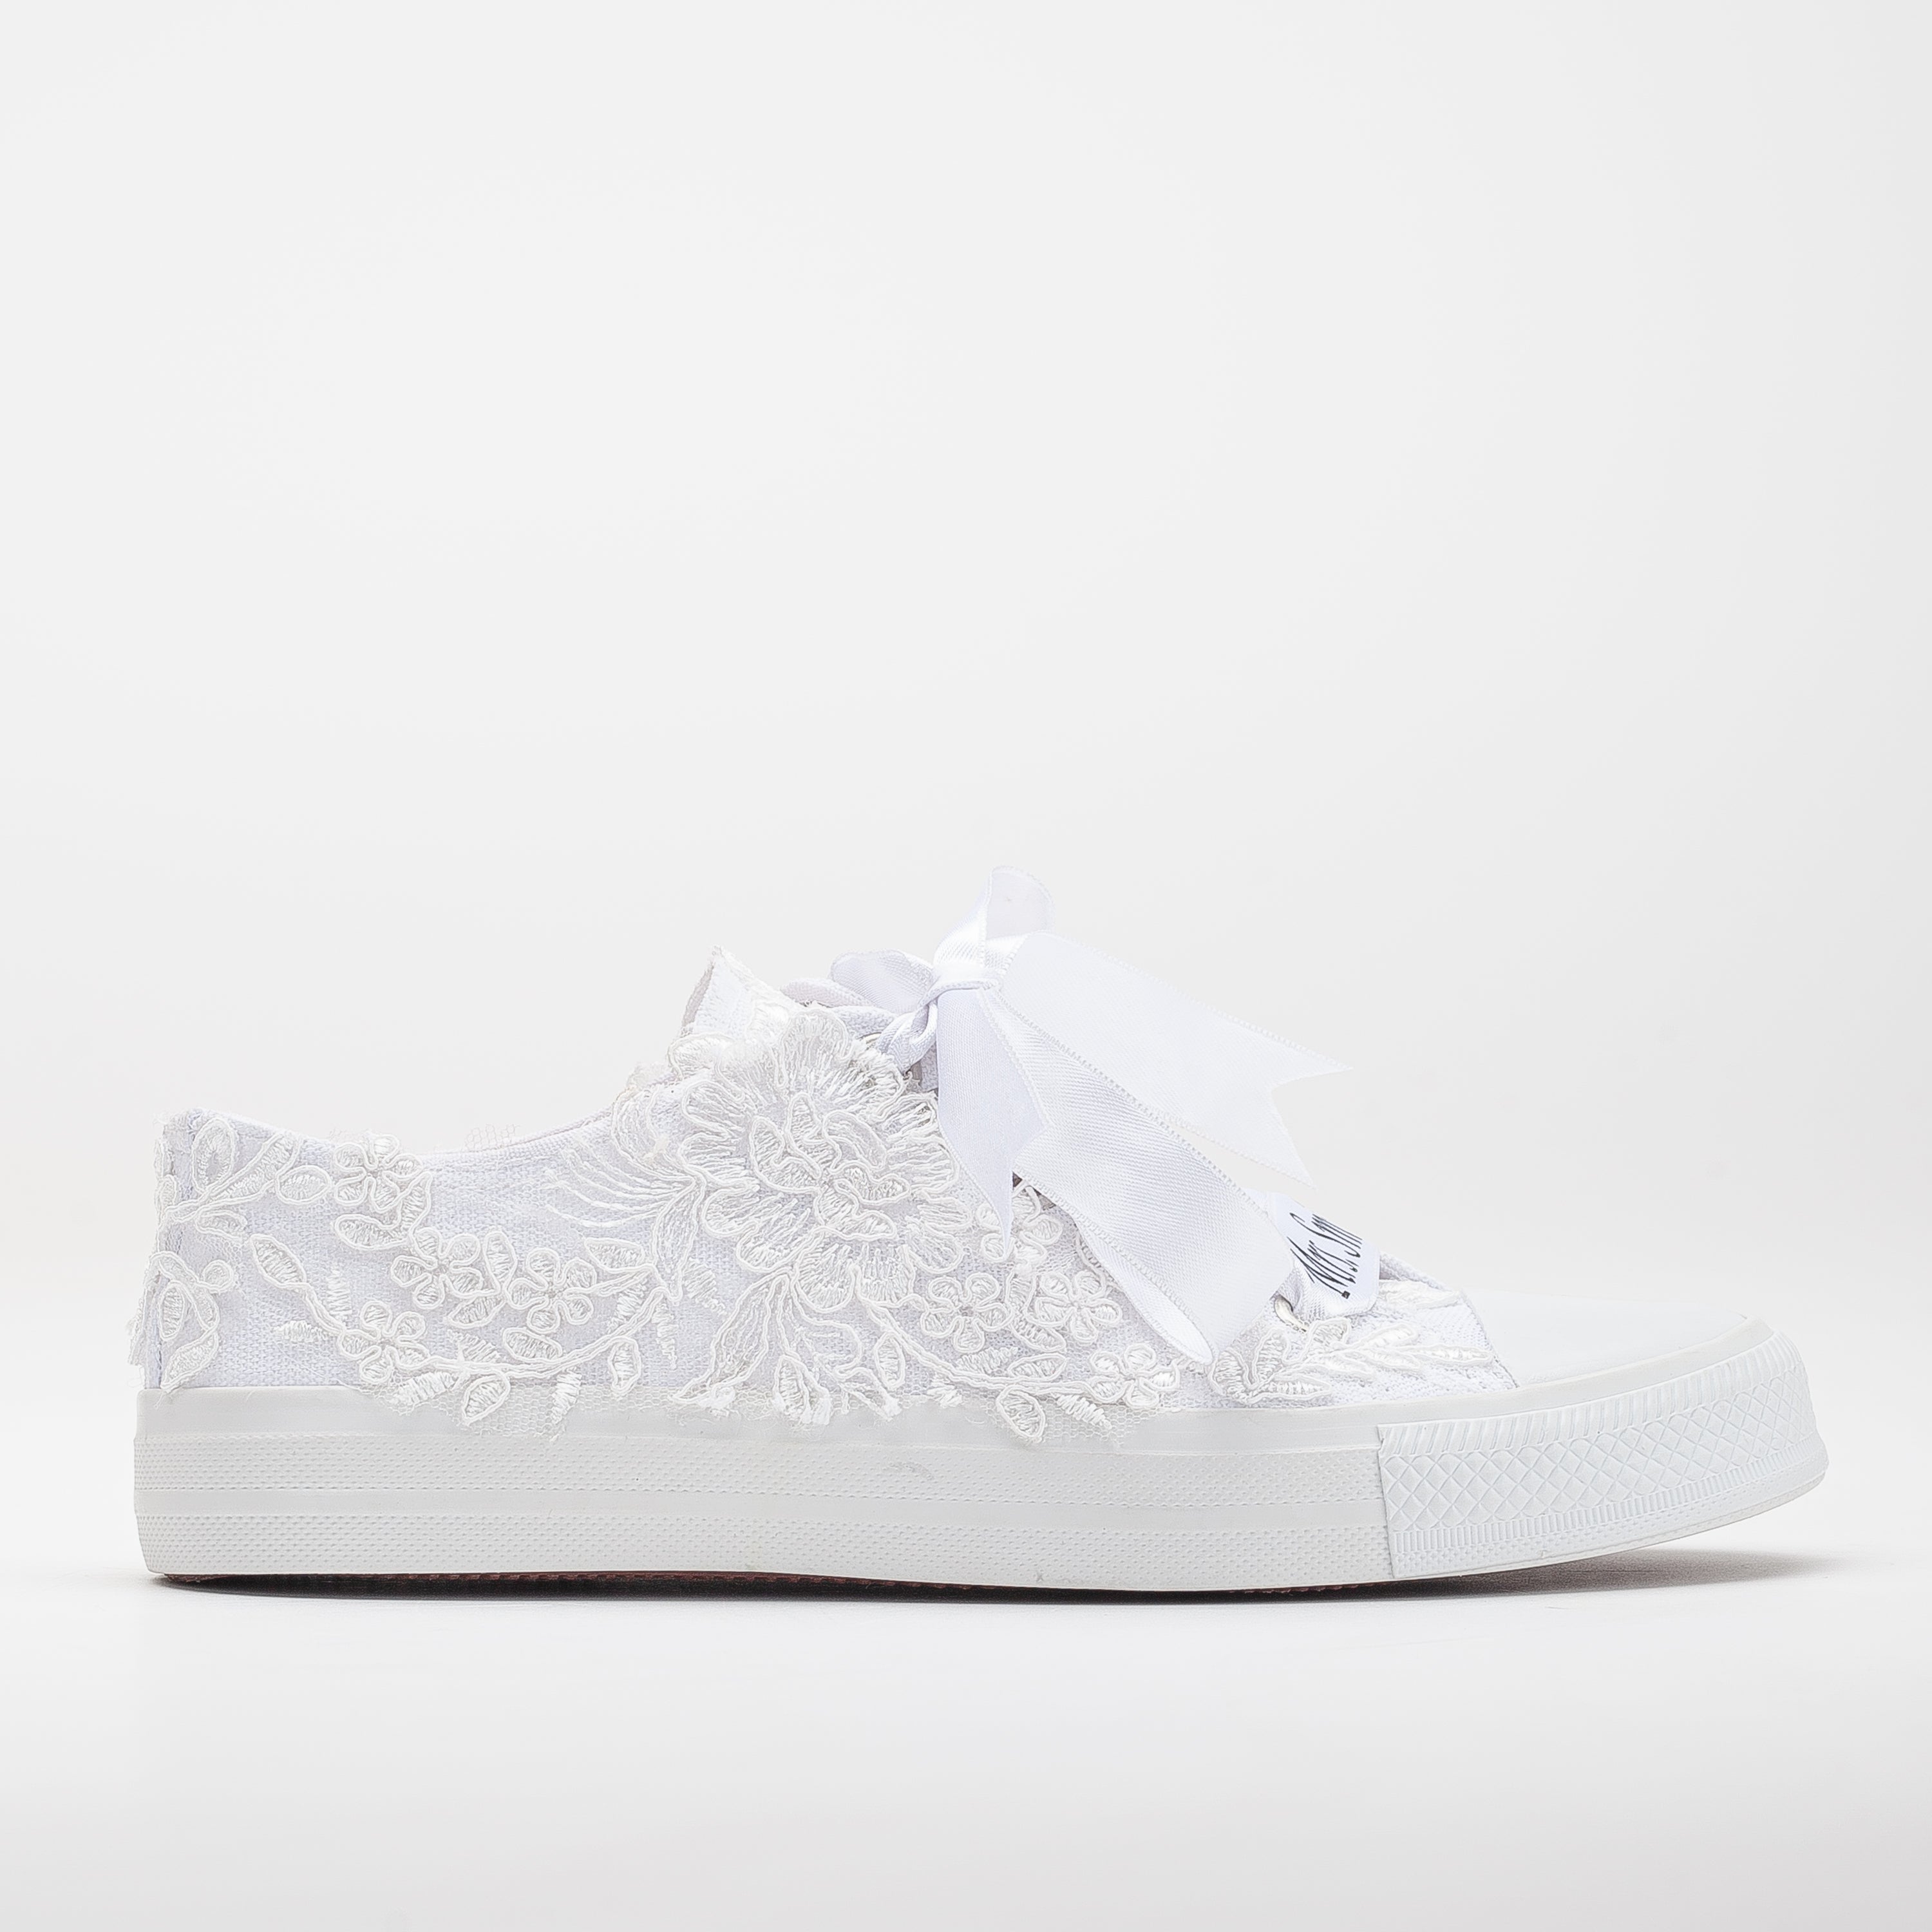 White Wedding Lace Sneakers, Bridal Lace Sneakers, Lace Wedding Sneakers, White Bridal Sneakers, Wedding Sneakers with Lace, Lace Bridal Shoes, Comfortable Wedding Sneakers, White Lace Bridal Footwear, Lace Sneakers for Brides, Elegant Wedding Sneakers